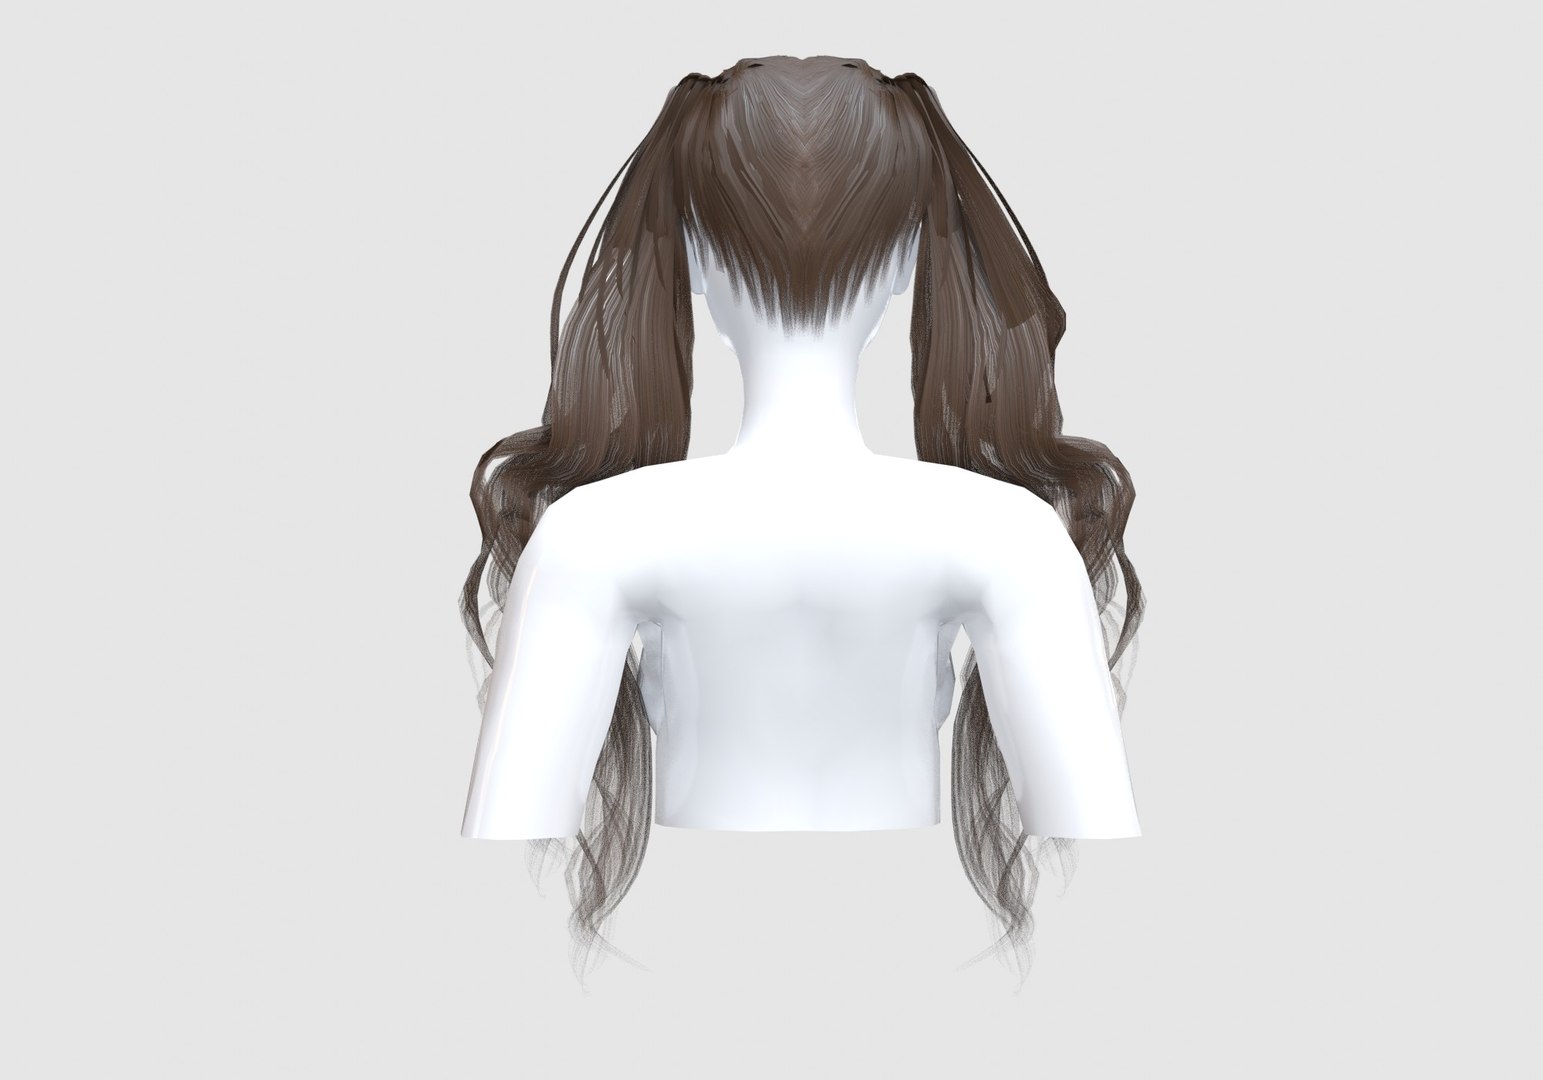 Cute Pigtails Hairstyle - 3D Model by nickianimations